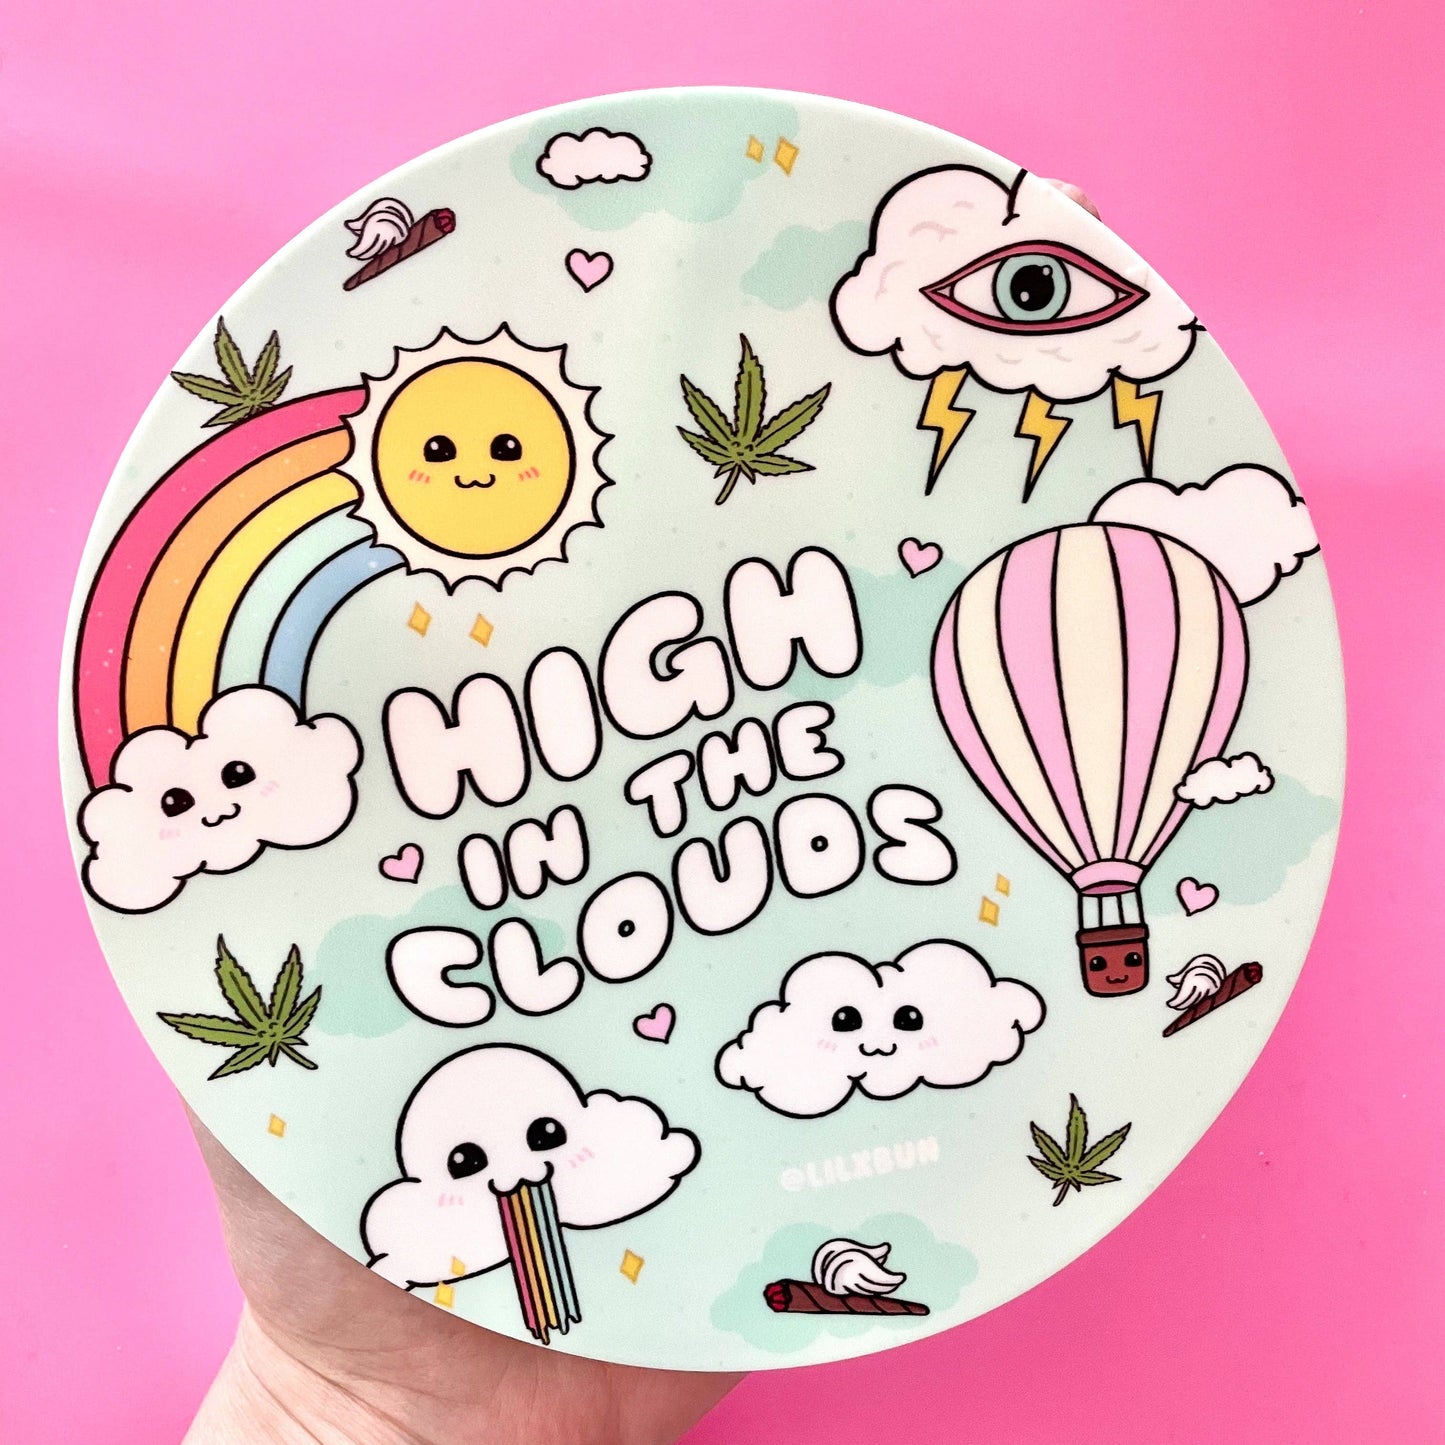 lilxbun - Mint High in the Clouds Silicone Dab Mat yoga smokes yoga studio, delivery, delivery near me, yoga smokes smoke shop, find smoke shop, head shop near me, yoga studio, headshop, head shop, local smoke shop, psl, psl smoke shop, smoke shop, smokeshop, yoga, yoga studio, dispensary, local dispensary, smokeshop near me, port saint lucie, florida, port st lucie, lounge, life, highlife, love, stoned, highsociety. Yoga Smokes Mint High in the Clouds Silicone Dab Mat